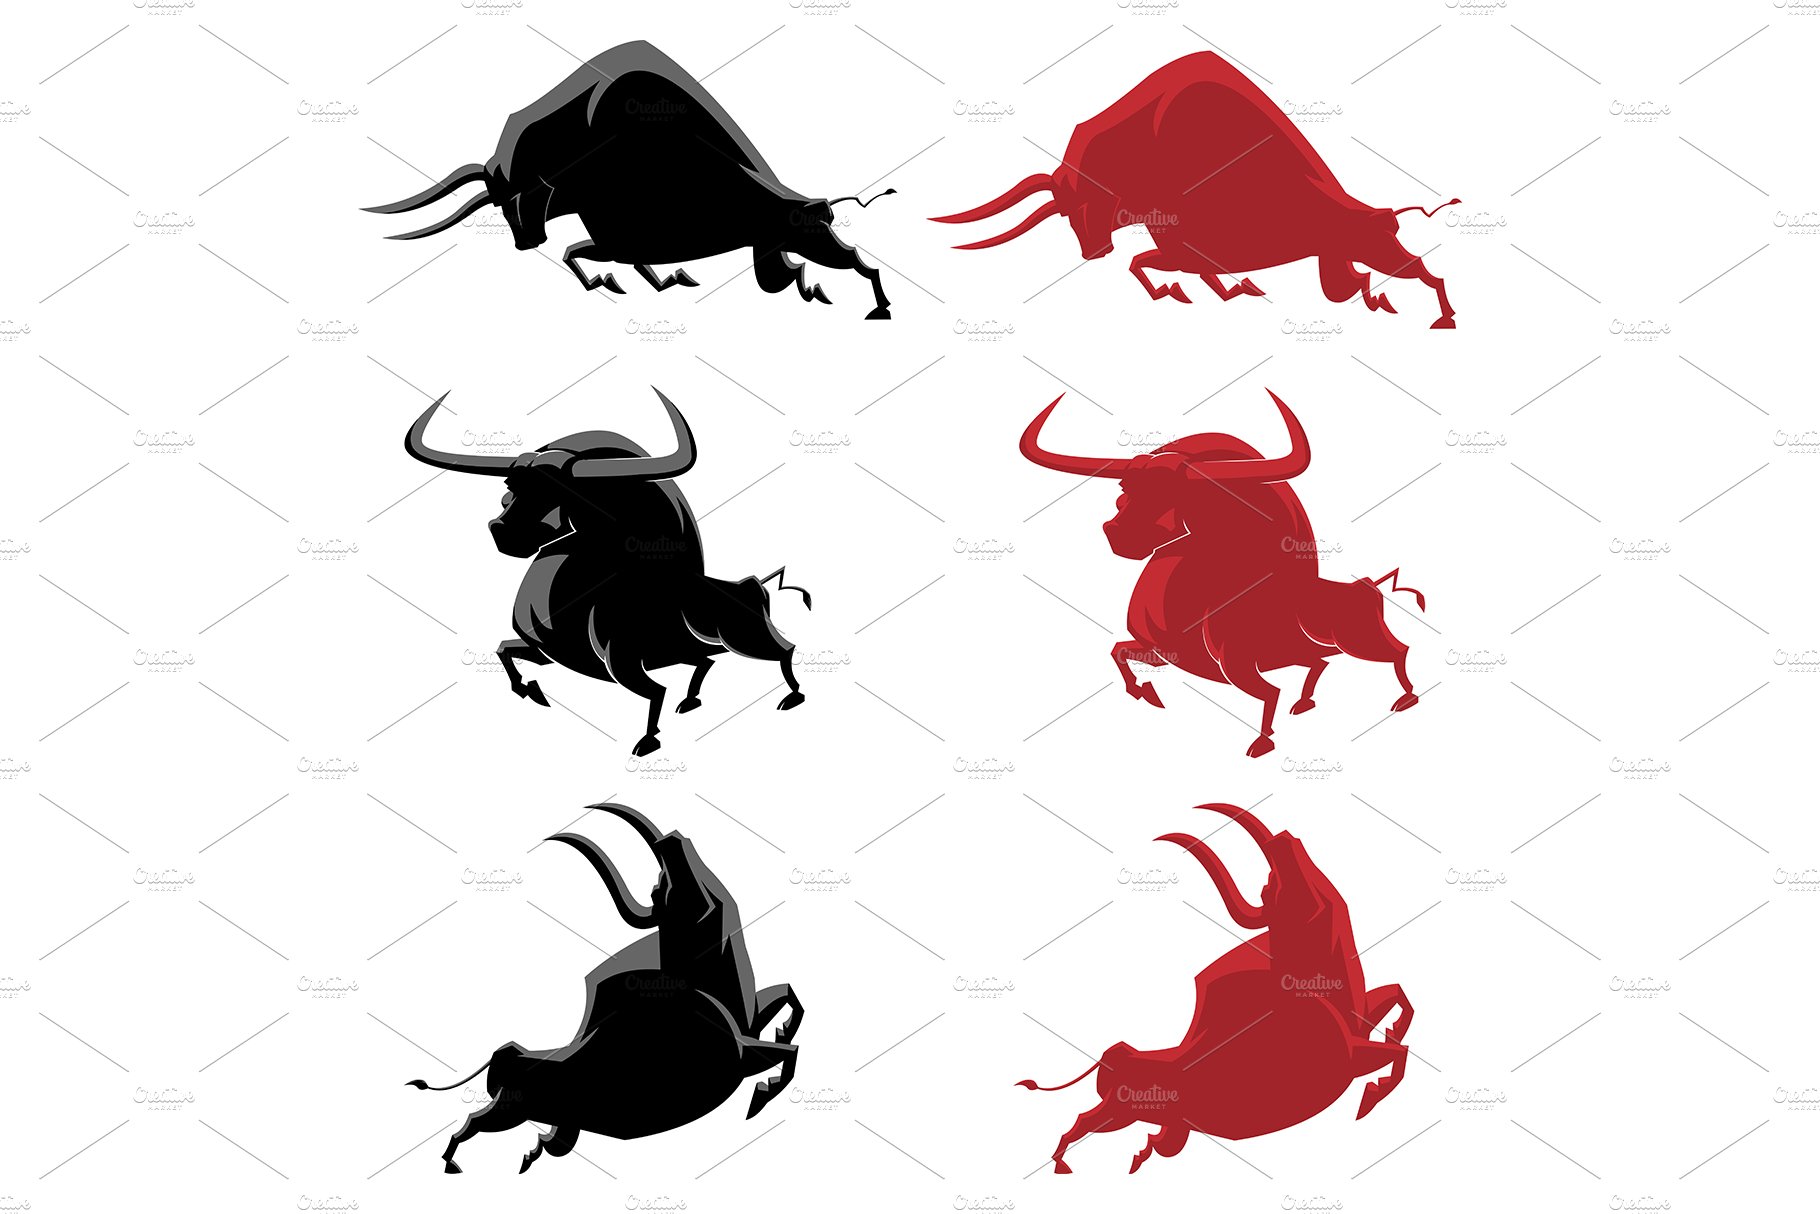 Bull Or Ox Silhouette Symbol cover image.